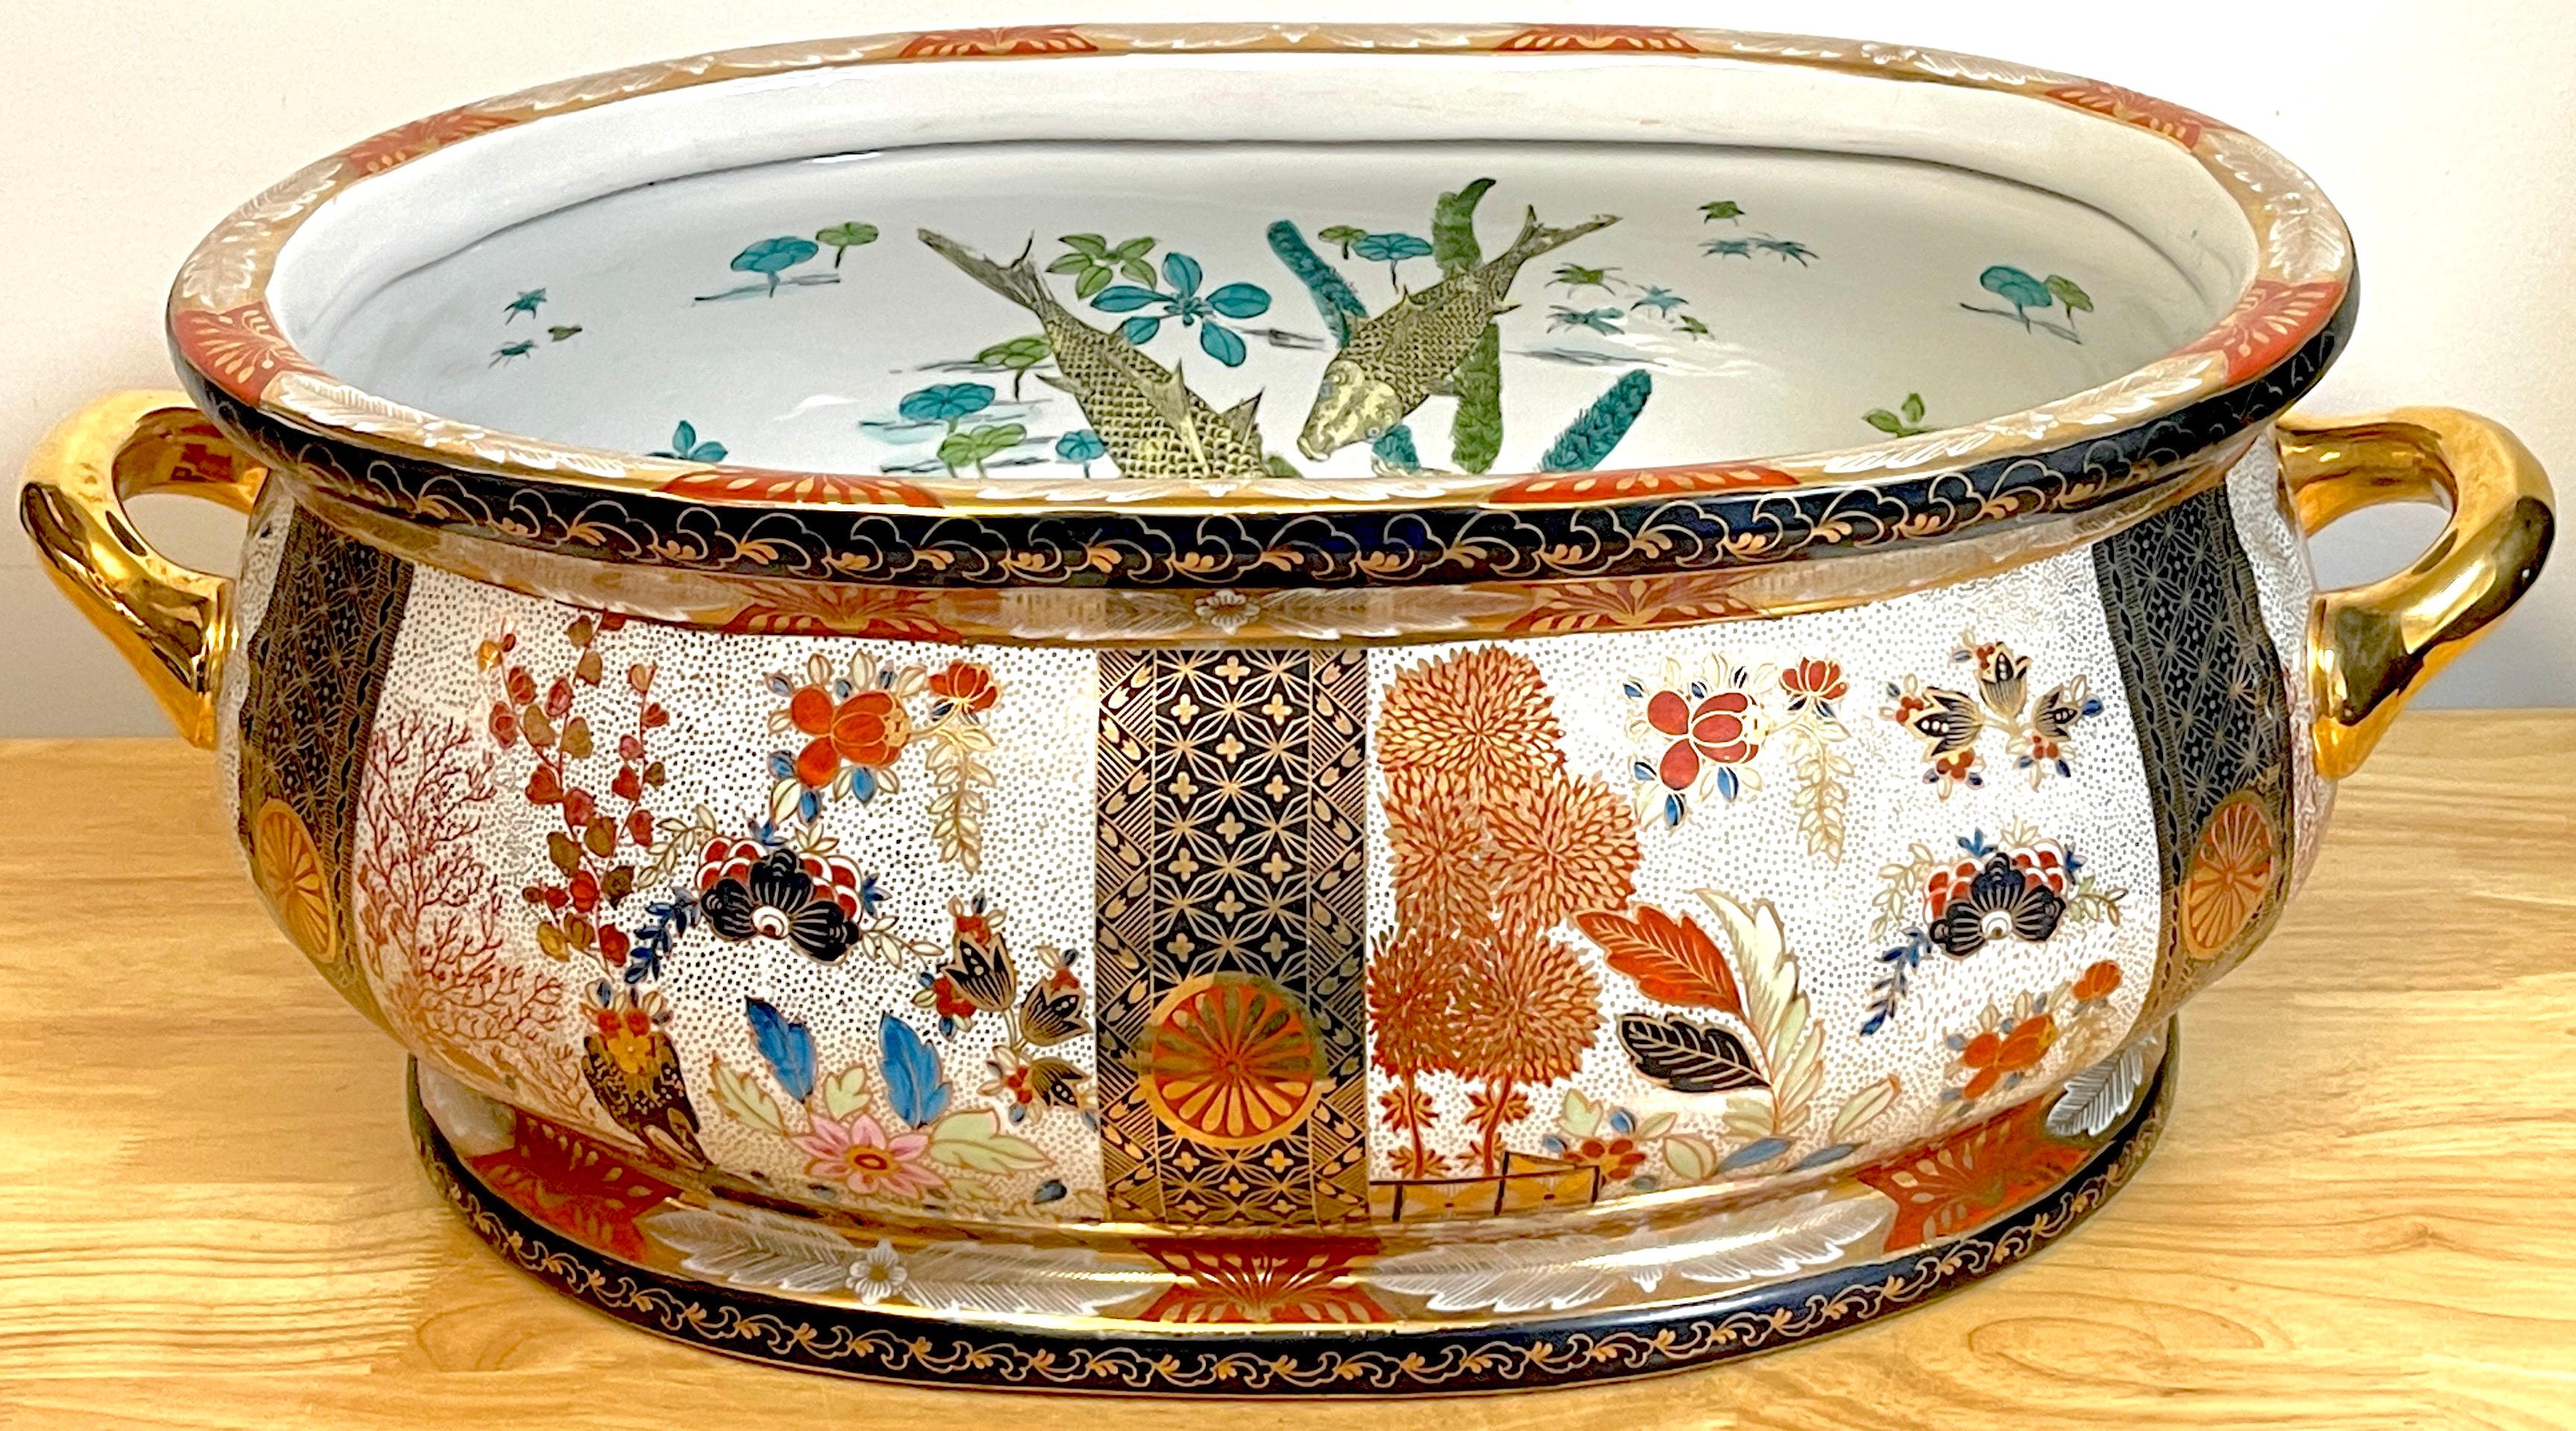 Large Royal Crown Derby Style 'Imari' Pattern Centerpiece For Sale 5